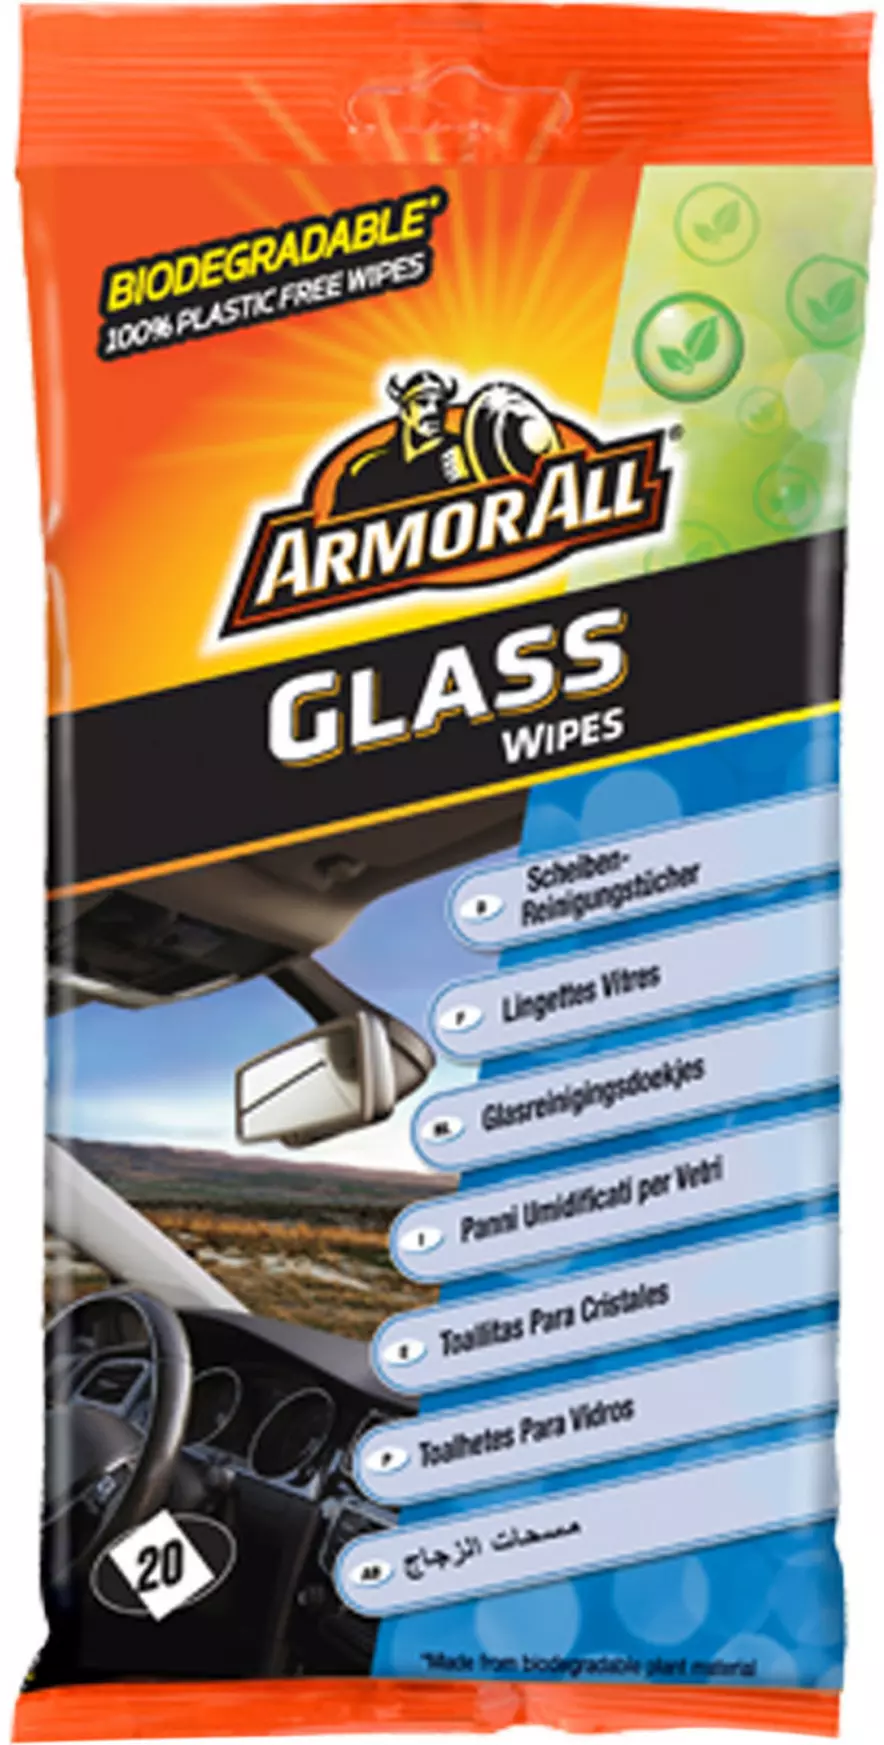 Armor All Glass Wipes (25 count), Glass Cleaners